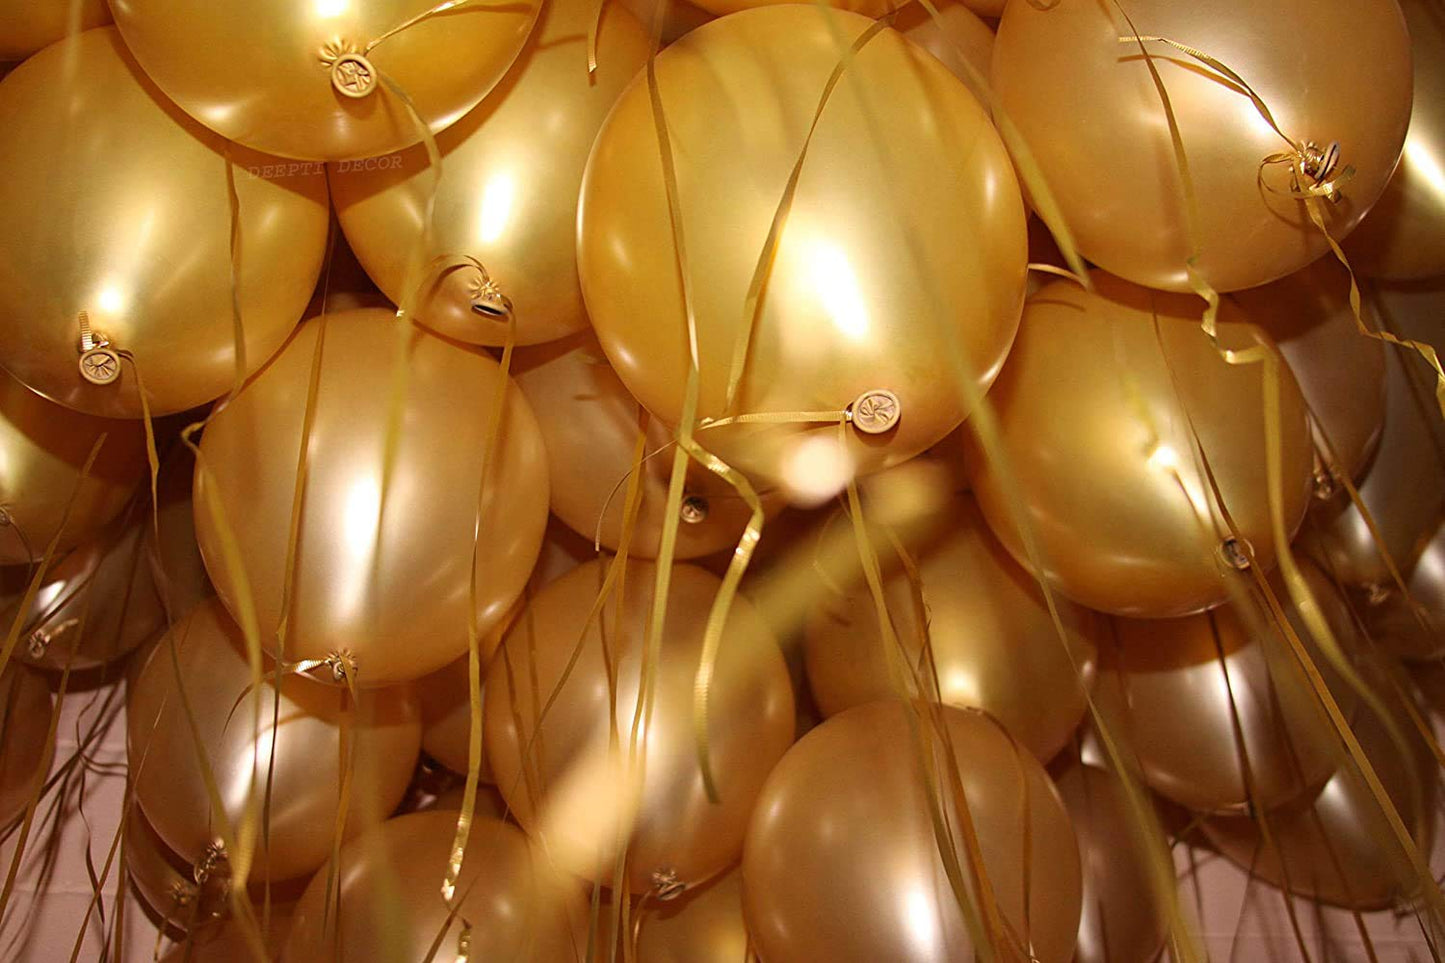 Decorative Balloons For Party, Metallic Balloons, Balloon For, Party, Pack Of 100